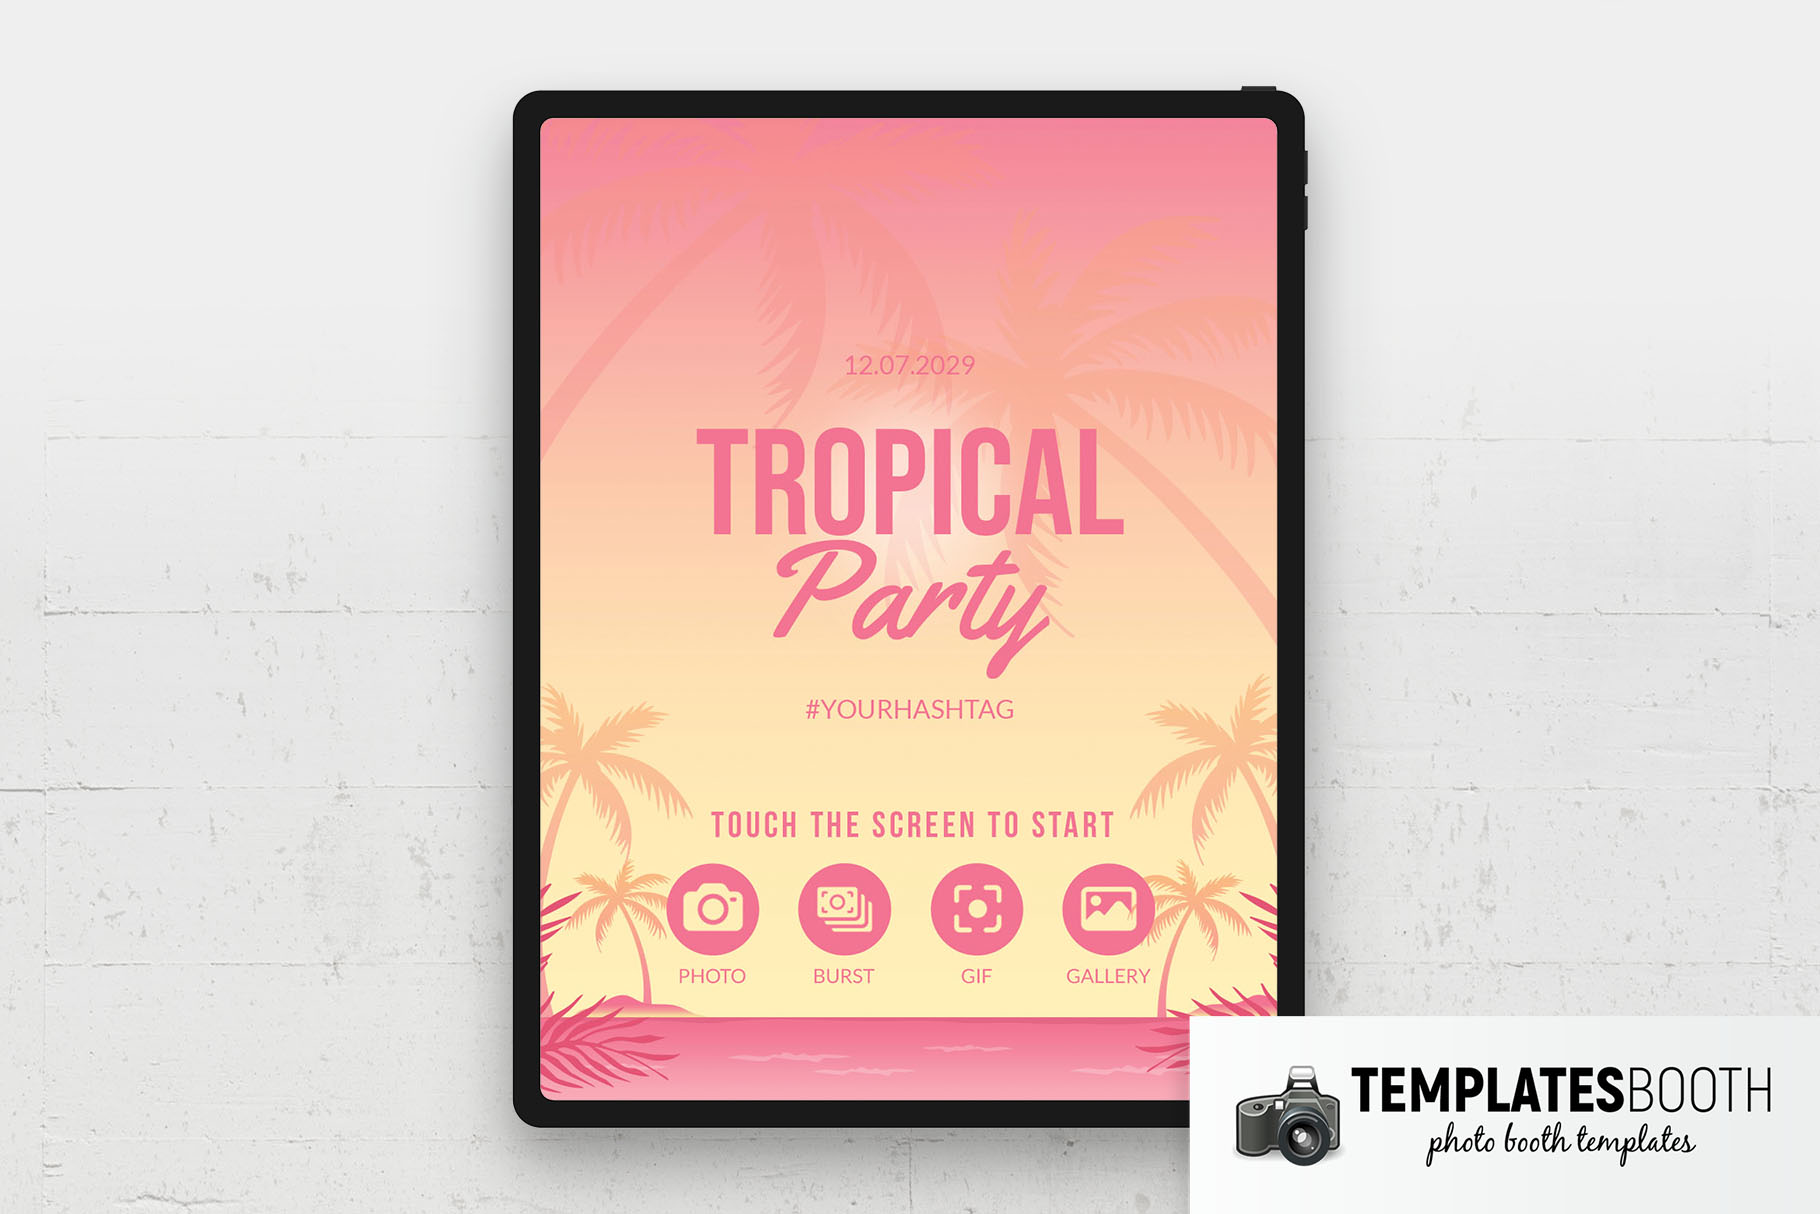 Tropical Party Photo Booth Welcome Screen